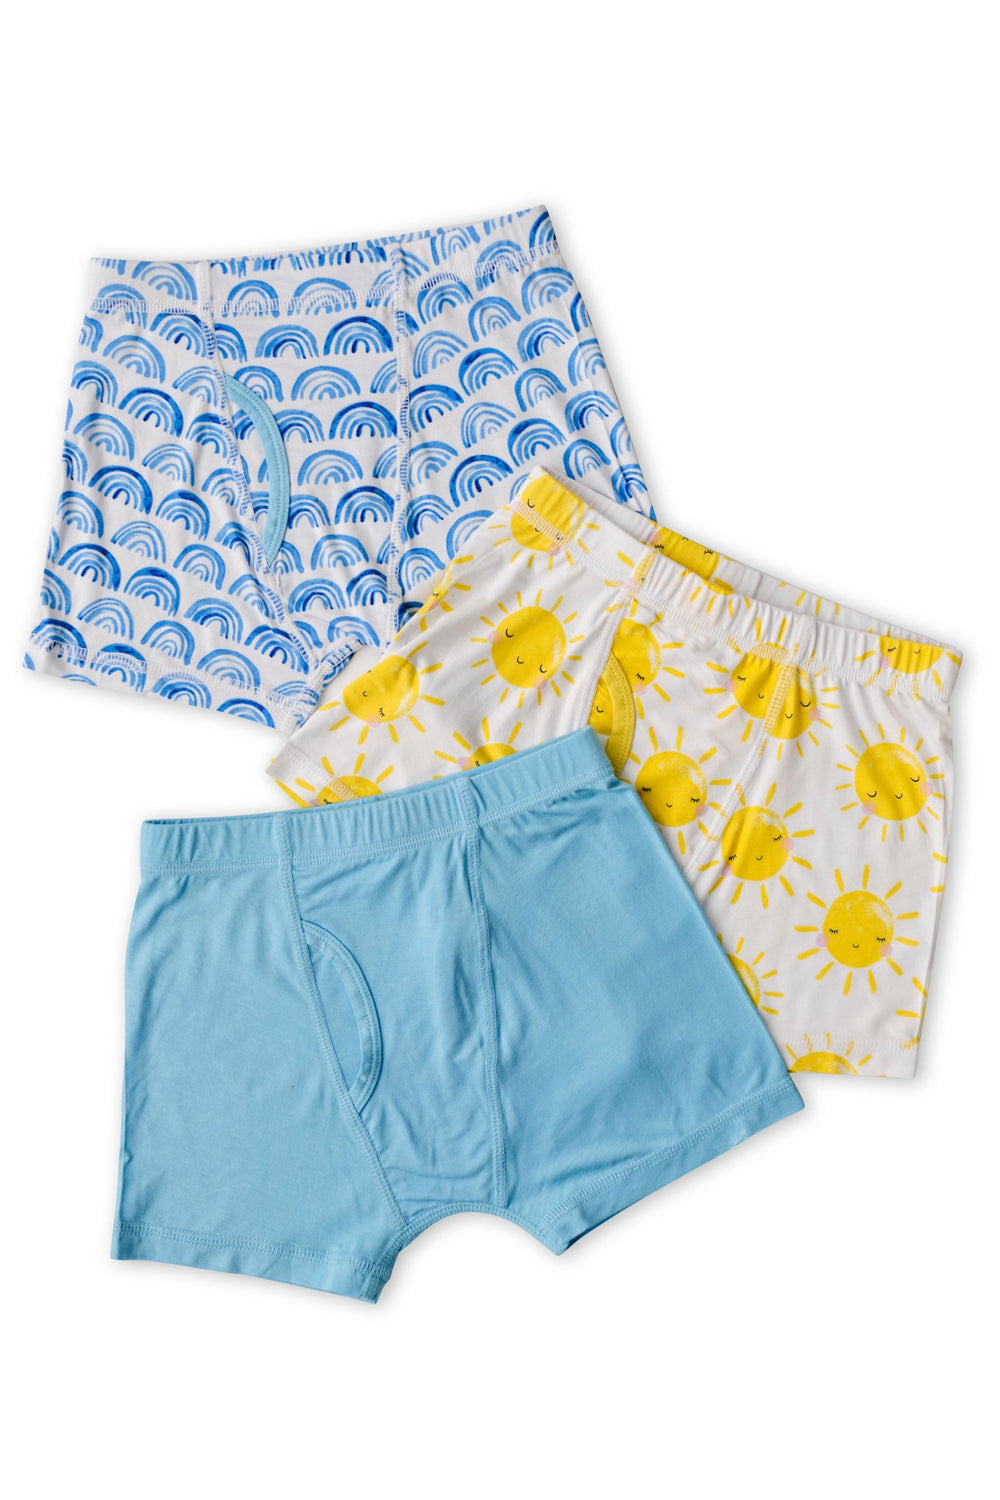 Scattered flat lay image of 3 sets of boys boxer brief underwear. One blue rainbows print, followed by one yellow smiling sunshine print, followed by one solid sky blue print. 